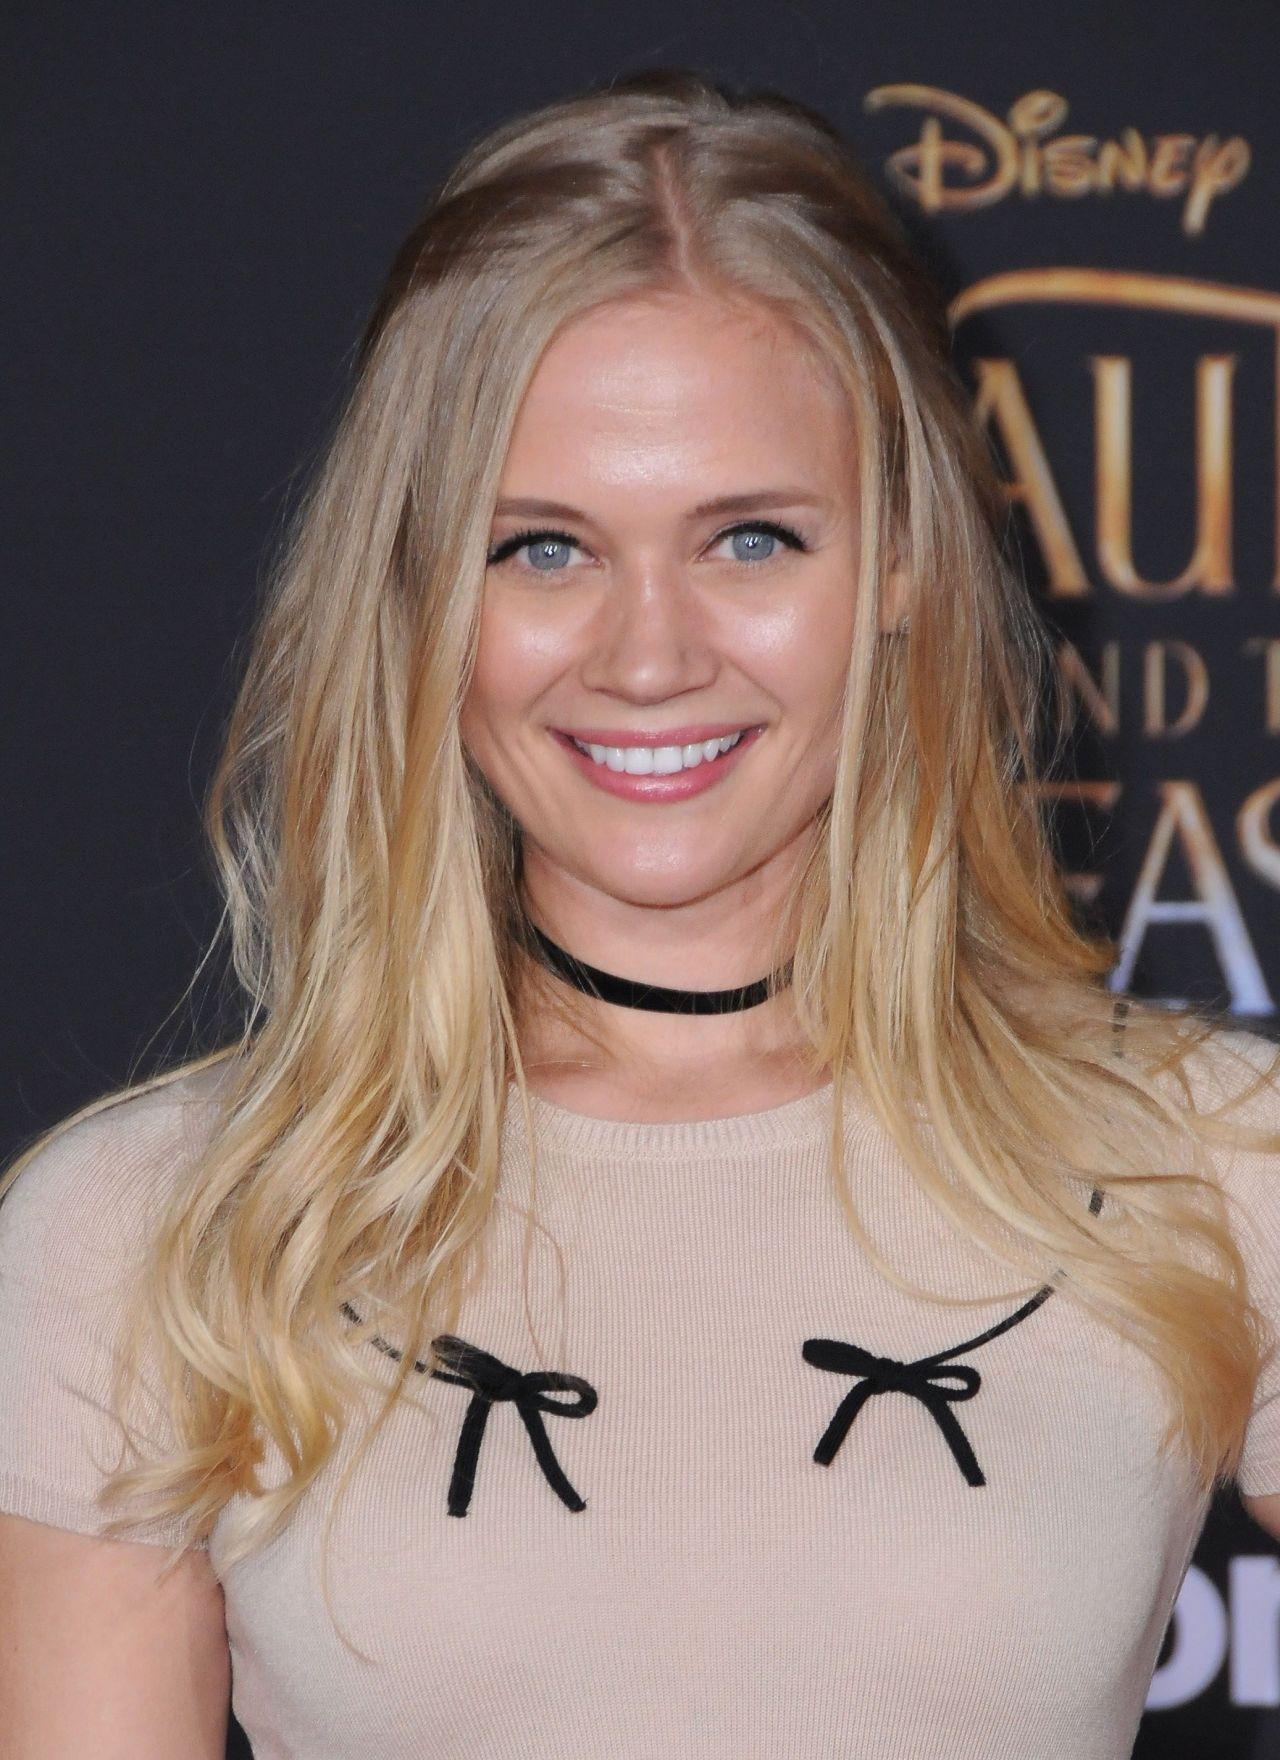 Carly Schroeder #CarlySchroeder Beauty And The Beast Movie Premiere